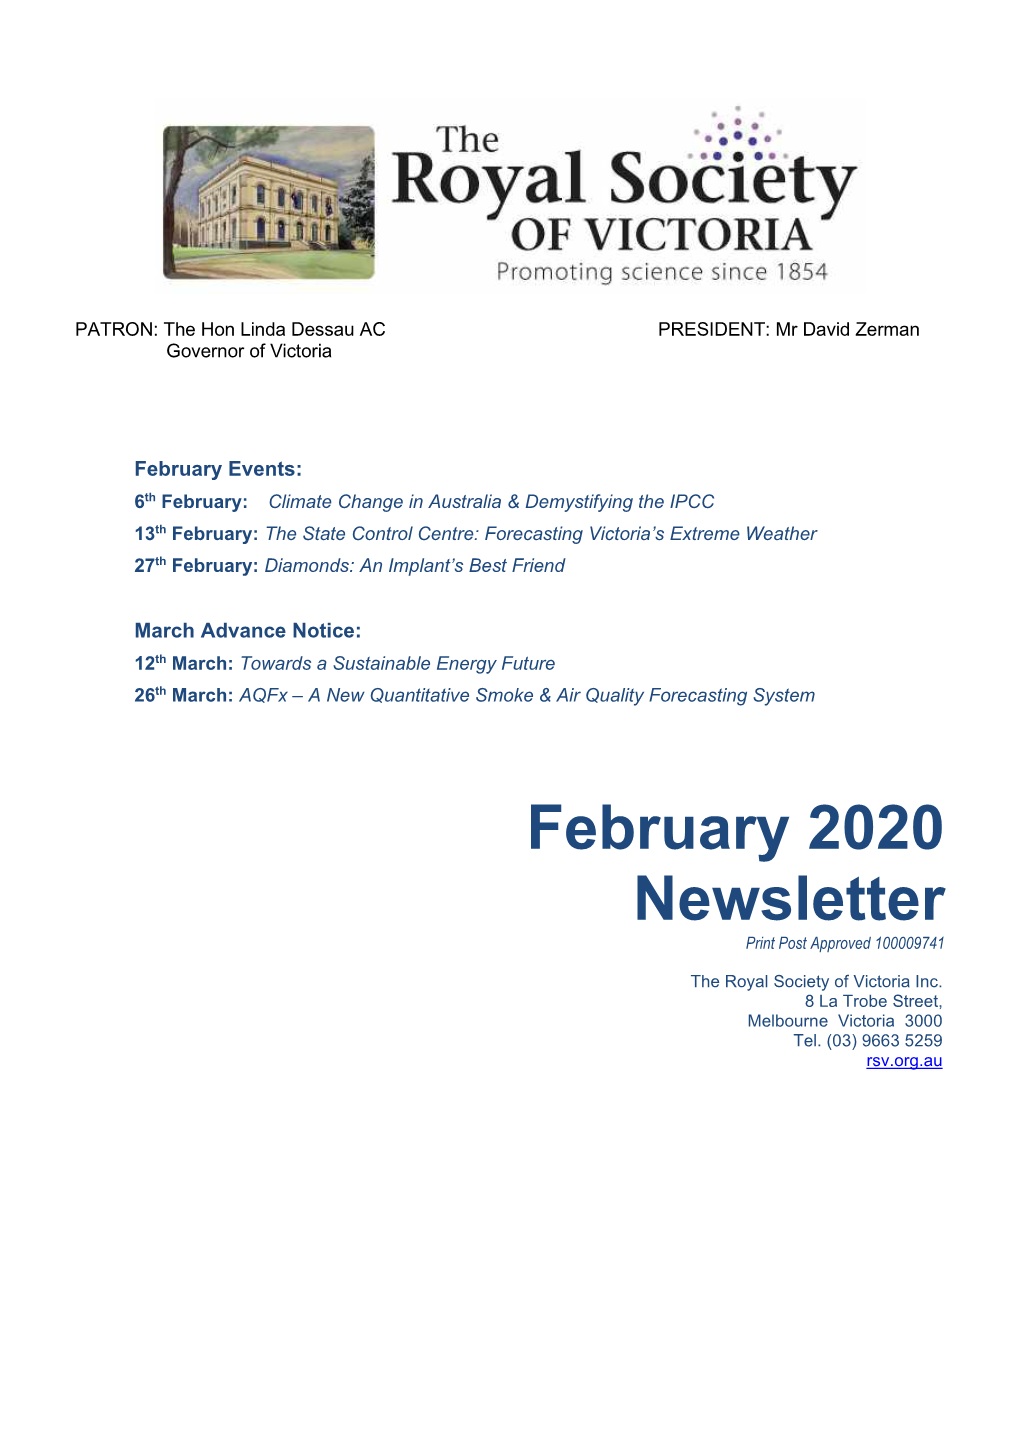 February 2020 Newsletter Print Post Approved 100009741